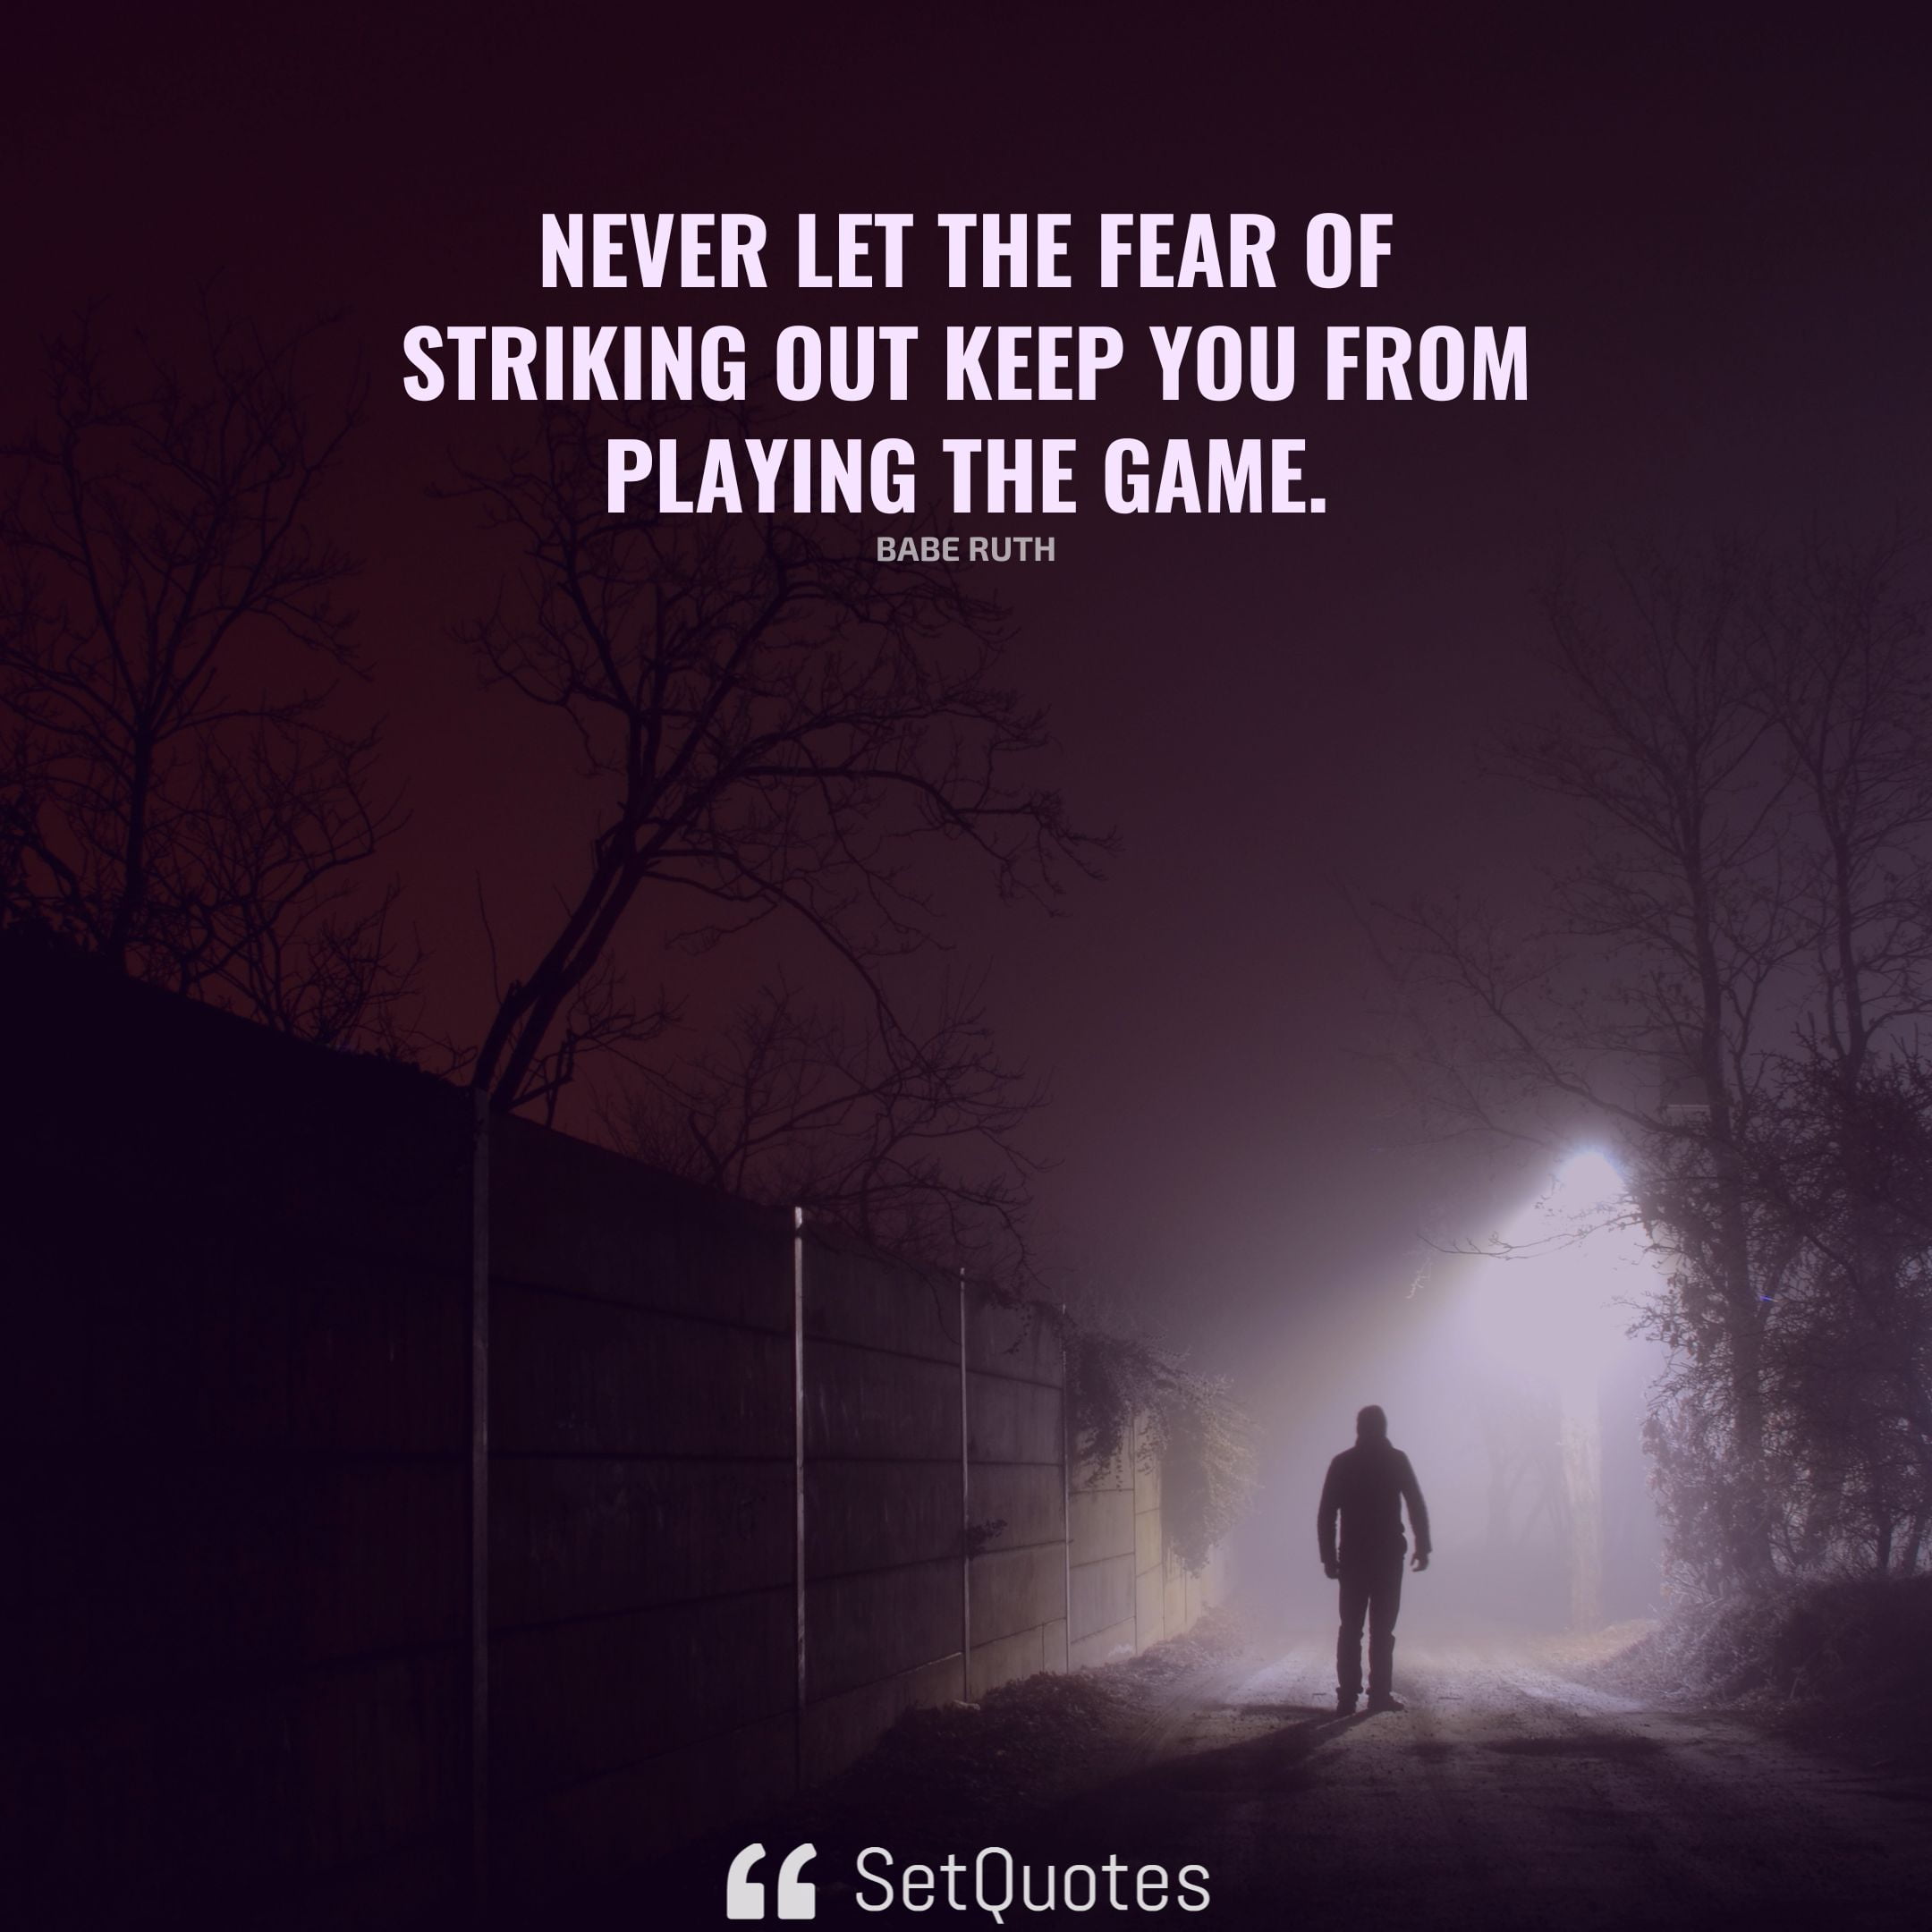 Never let the fear of striking out keep you from playing the game. - Babe Ruth - SetQuotes